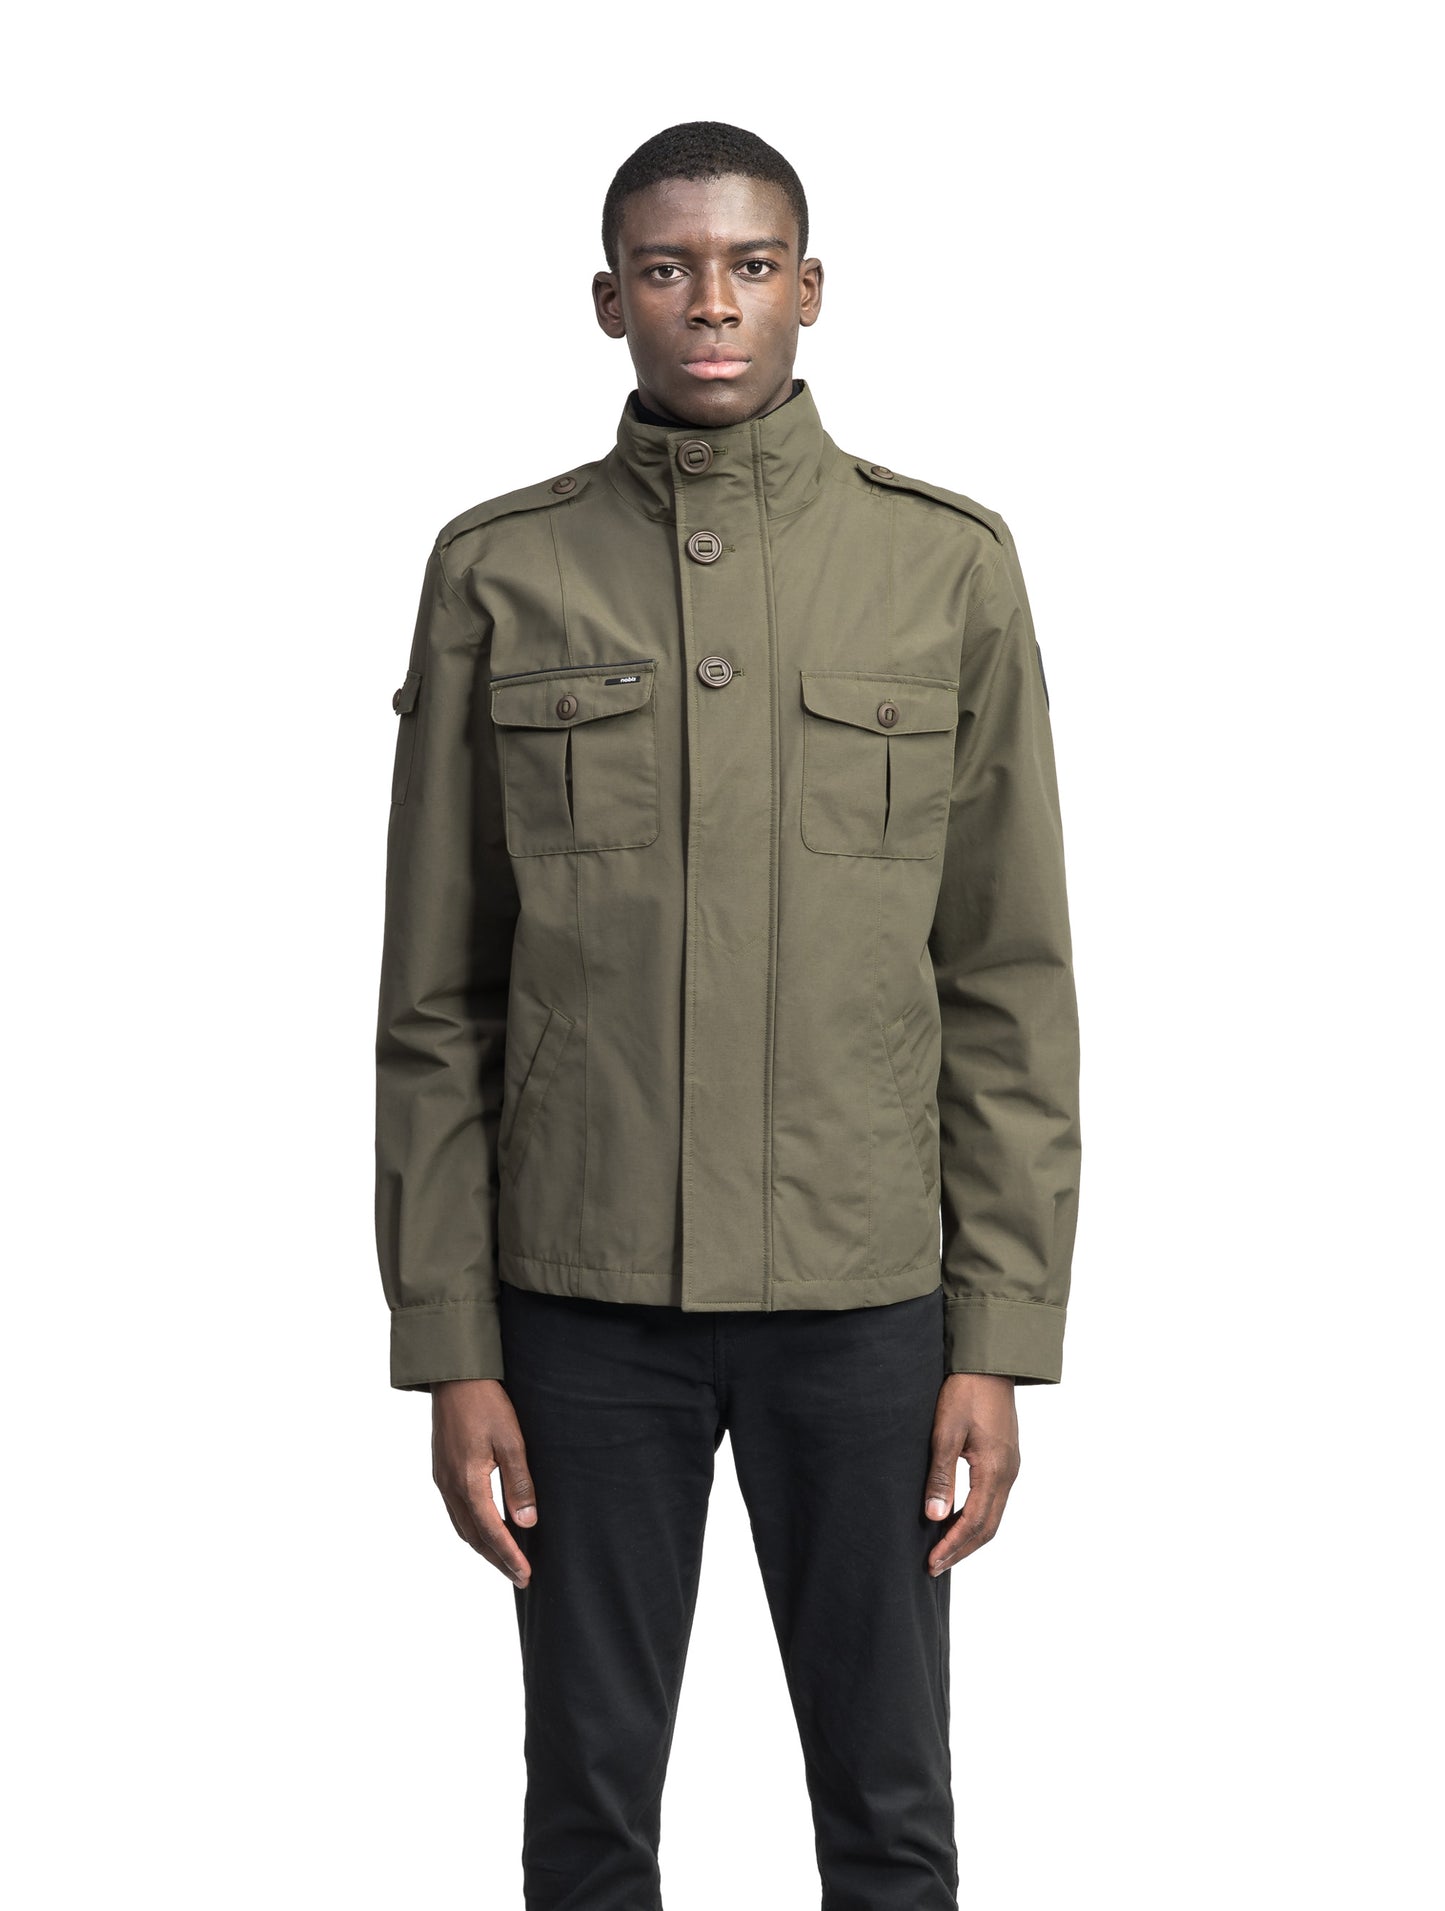 Men's waist length military style jacket in Fatigue